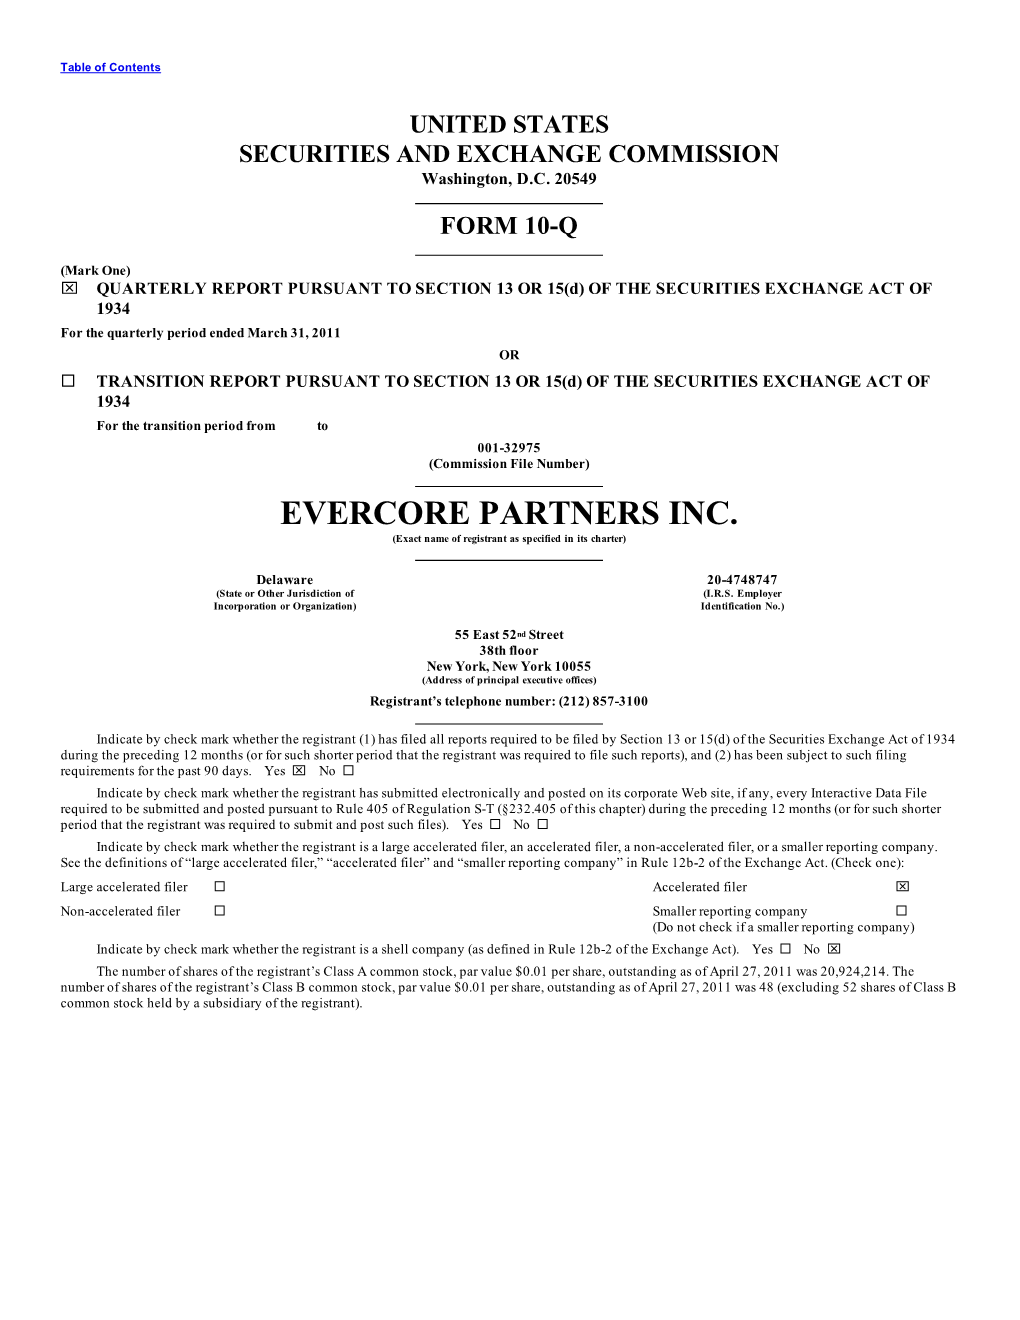 EVERCORE PARTNERS INC. (Exact Name of Registrant As Specified in Its Charter)